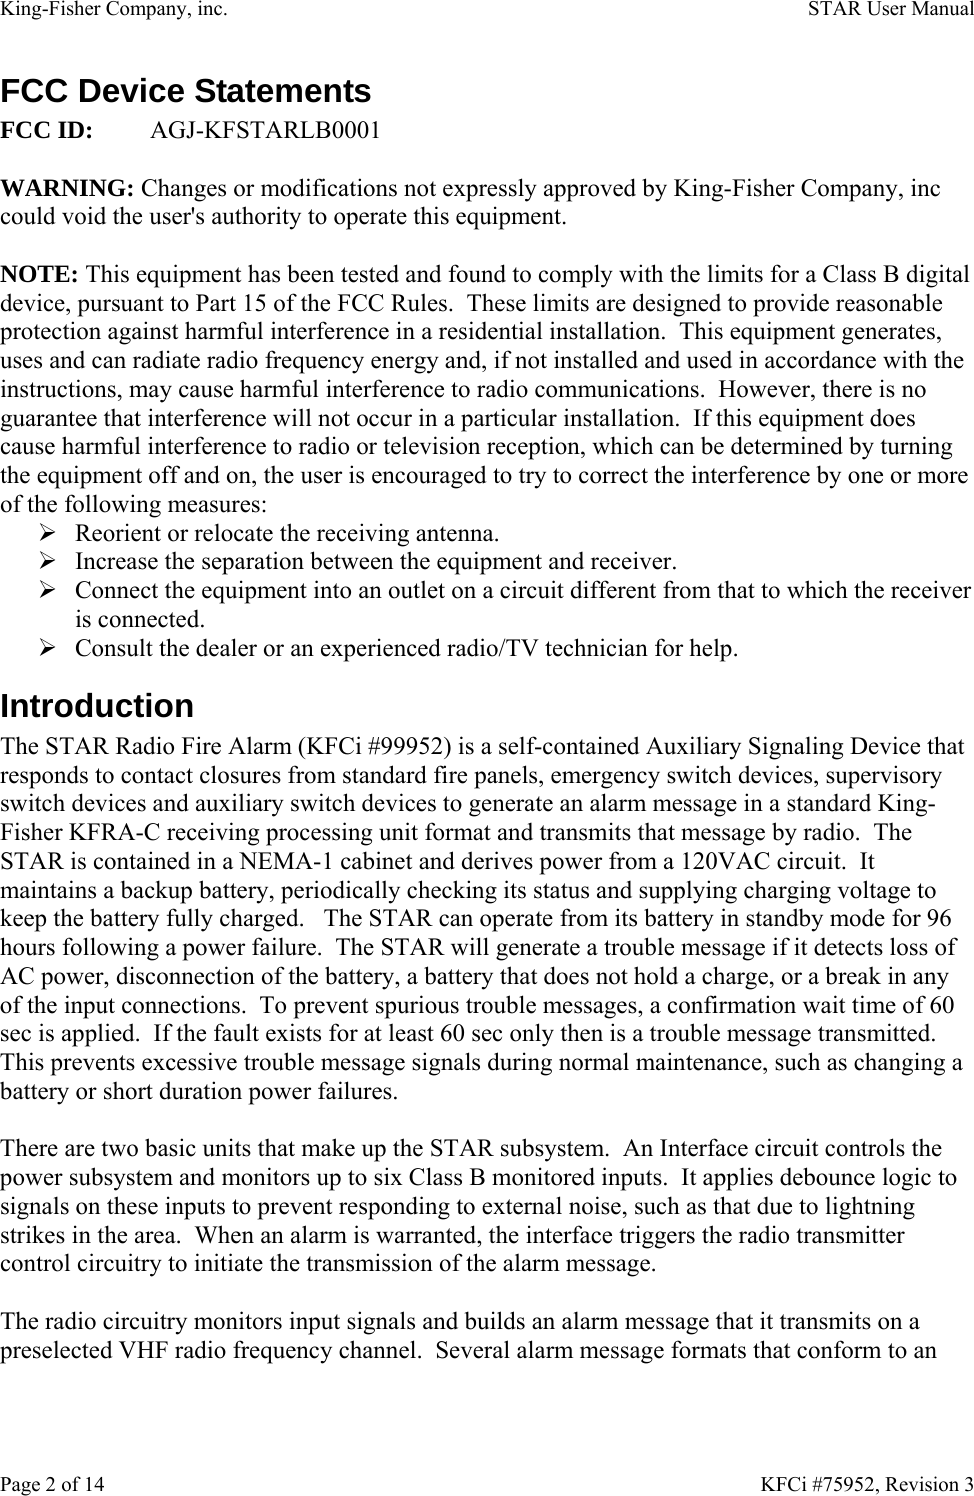 King-Fisher Company, inc.    STAR User Manual Page 2 of 14    KFCi #75952, Revision 3 FCC Device Statements FCC ID: AGJ-KFSTARLB0001  WARNING: Changes or modifications not expressly approved by King-Fisher Company, inc could void the user&apos;s authority to operate this equipment.  NOTE: This equipment has been tested and found to comply with the limits for a Class B digital device, pursuant to Part 15 of the FCC Rules.  These limits are designed to provide reasonable protection against harmful interference in a residential installation.  This equipment generates, uses and can radiate radio frequency energy and, if not installed and used in accordance with the instructions, may cause harmful interference to radio communications.  However, there is no guarantee that interference will not occur in a particular installation.  If this equipment does cause harmful interference to radio or television reception, which can be determined by turning the equipment off and on, the user is encouraged to try to correct the interference by one or more of the following measures: ¾ Reorient or relocate the receiving antenna. ¾ Increase the separation between the equipment and receiver. ¾ Connect the equipment into an outlet on a circuit different from that to which the receiver is connected. ¾ Consult the dealer or an experienced radio/TV technician for help. Introduction The STAR Radio Fire Alarm (KFCi #99952) is a self-contained Auxiliary Signaling Device that responds to contact closures from standard fire panels, emergency switch devices, supervisory switch devices and auxiliary switch devices to generate an alarm message in a standard King-Fisher KFRA-C receiving processing unit format and transmits that message by radio.  The STAR is contained in a NEMA-1 cabinet and derives power from a 120VAC circuit.  It maintains a backup battery, periodically checking its status and supplying charging voltage to keep the battery fully charged.   The STAR can operate from its battery in standby mode for 96 hours following a power failure.  The STAR will generate a trouble message if it detects loss of AC power, disconnection of the battery, a battery that does not hold a charge, or a break in any of the input connections.  To prevent spurious trouble messages, a confirmation wait time of 60 sec is applied.  If the fault exists for at least 60 sec only then is a trouble message transmitted.  This prevents excessive trouble message signals during normal maintenance, such as changing a battery or short duration power failures.  There are two basic units that make up the STAR subsystem.  An Interface circuit controls the power subsystem and monitors up to six Class B monitored inputs.  It applies debounce logic to signals on these inputs to prevent responding to external noise, such as that due to lightning strikes in the area.  When an alarm is warranted, the interface triggers the radio transmitter control circuitry to initiate the transmission of the alarm message.  The radio circuitry monitors input signals and builds an alarm message that it transmits on a preselected VHF radio frequency channel.  Several alarm message formats that conform to an 